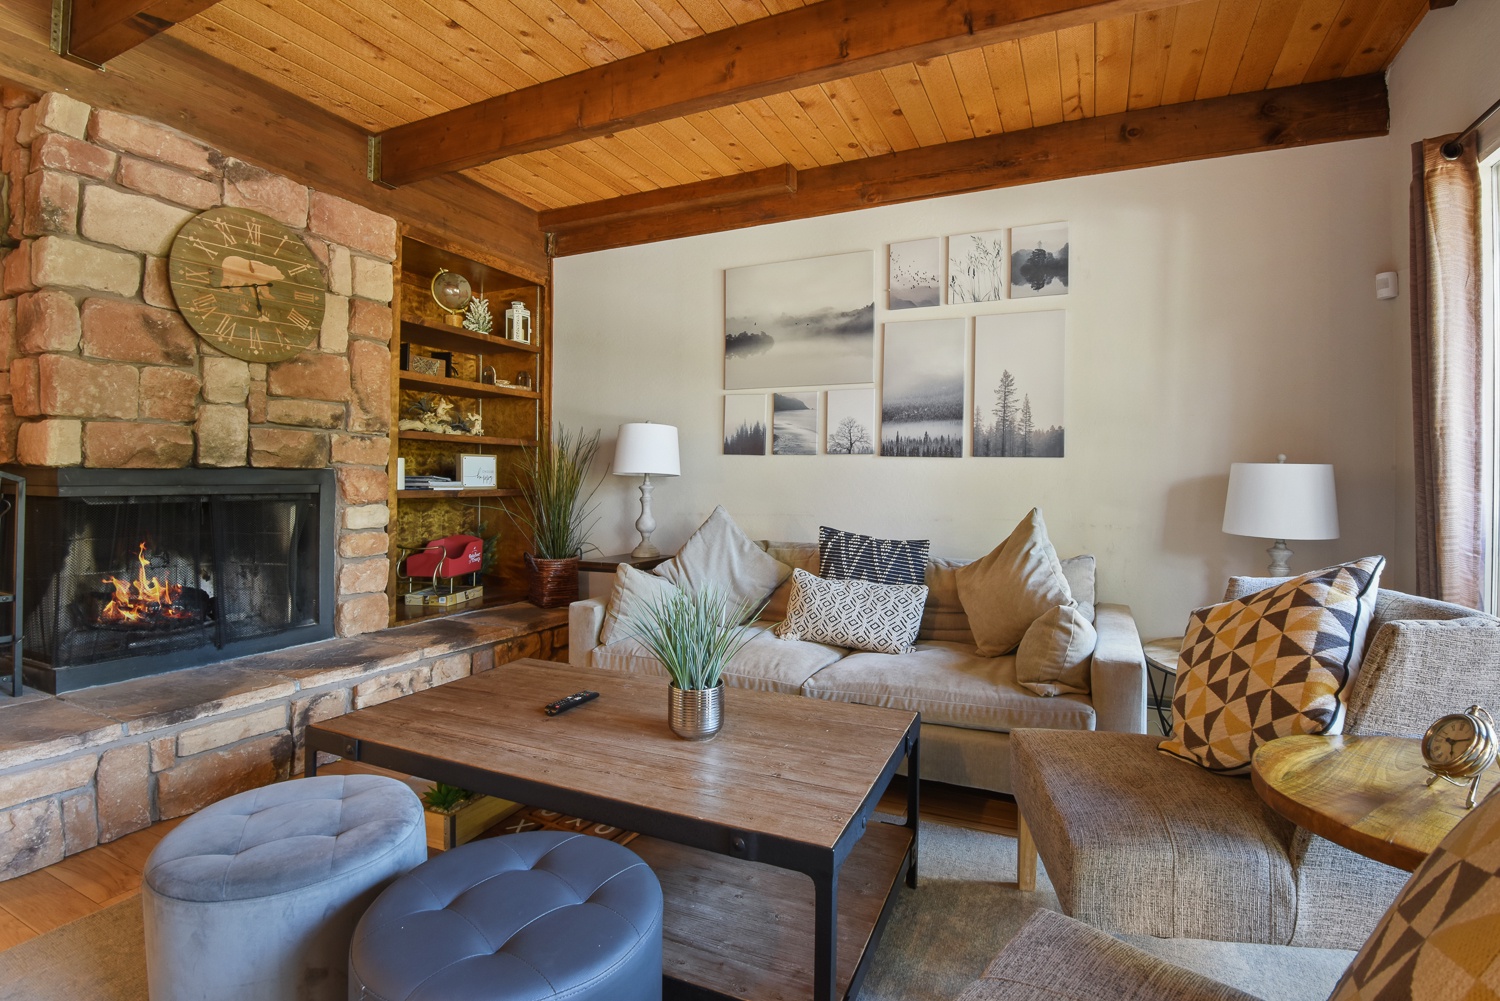 Unit #2: Elegant, rustic finishes compliment the comfy furnishings in the living room